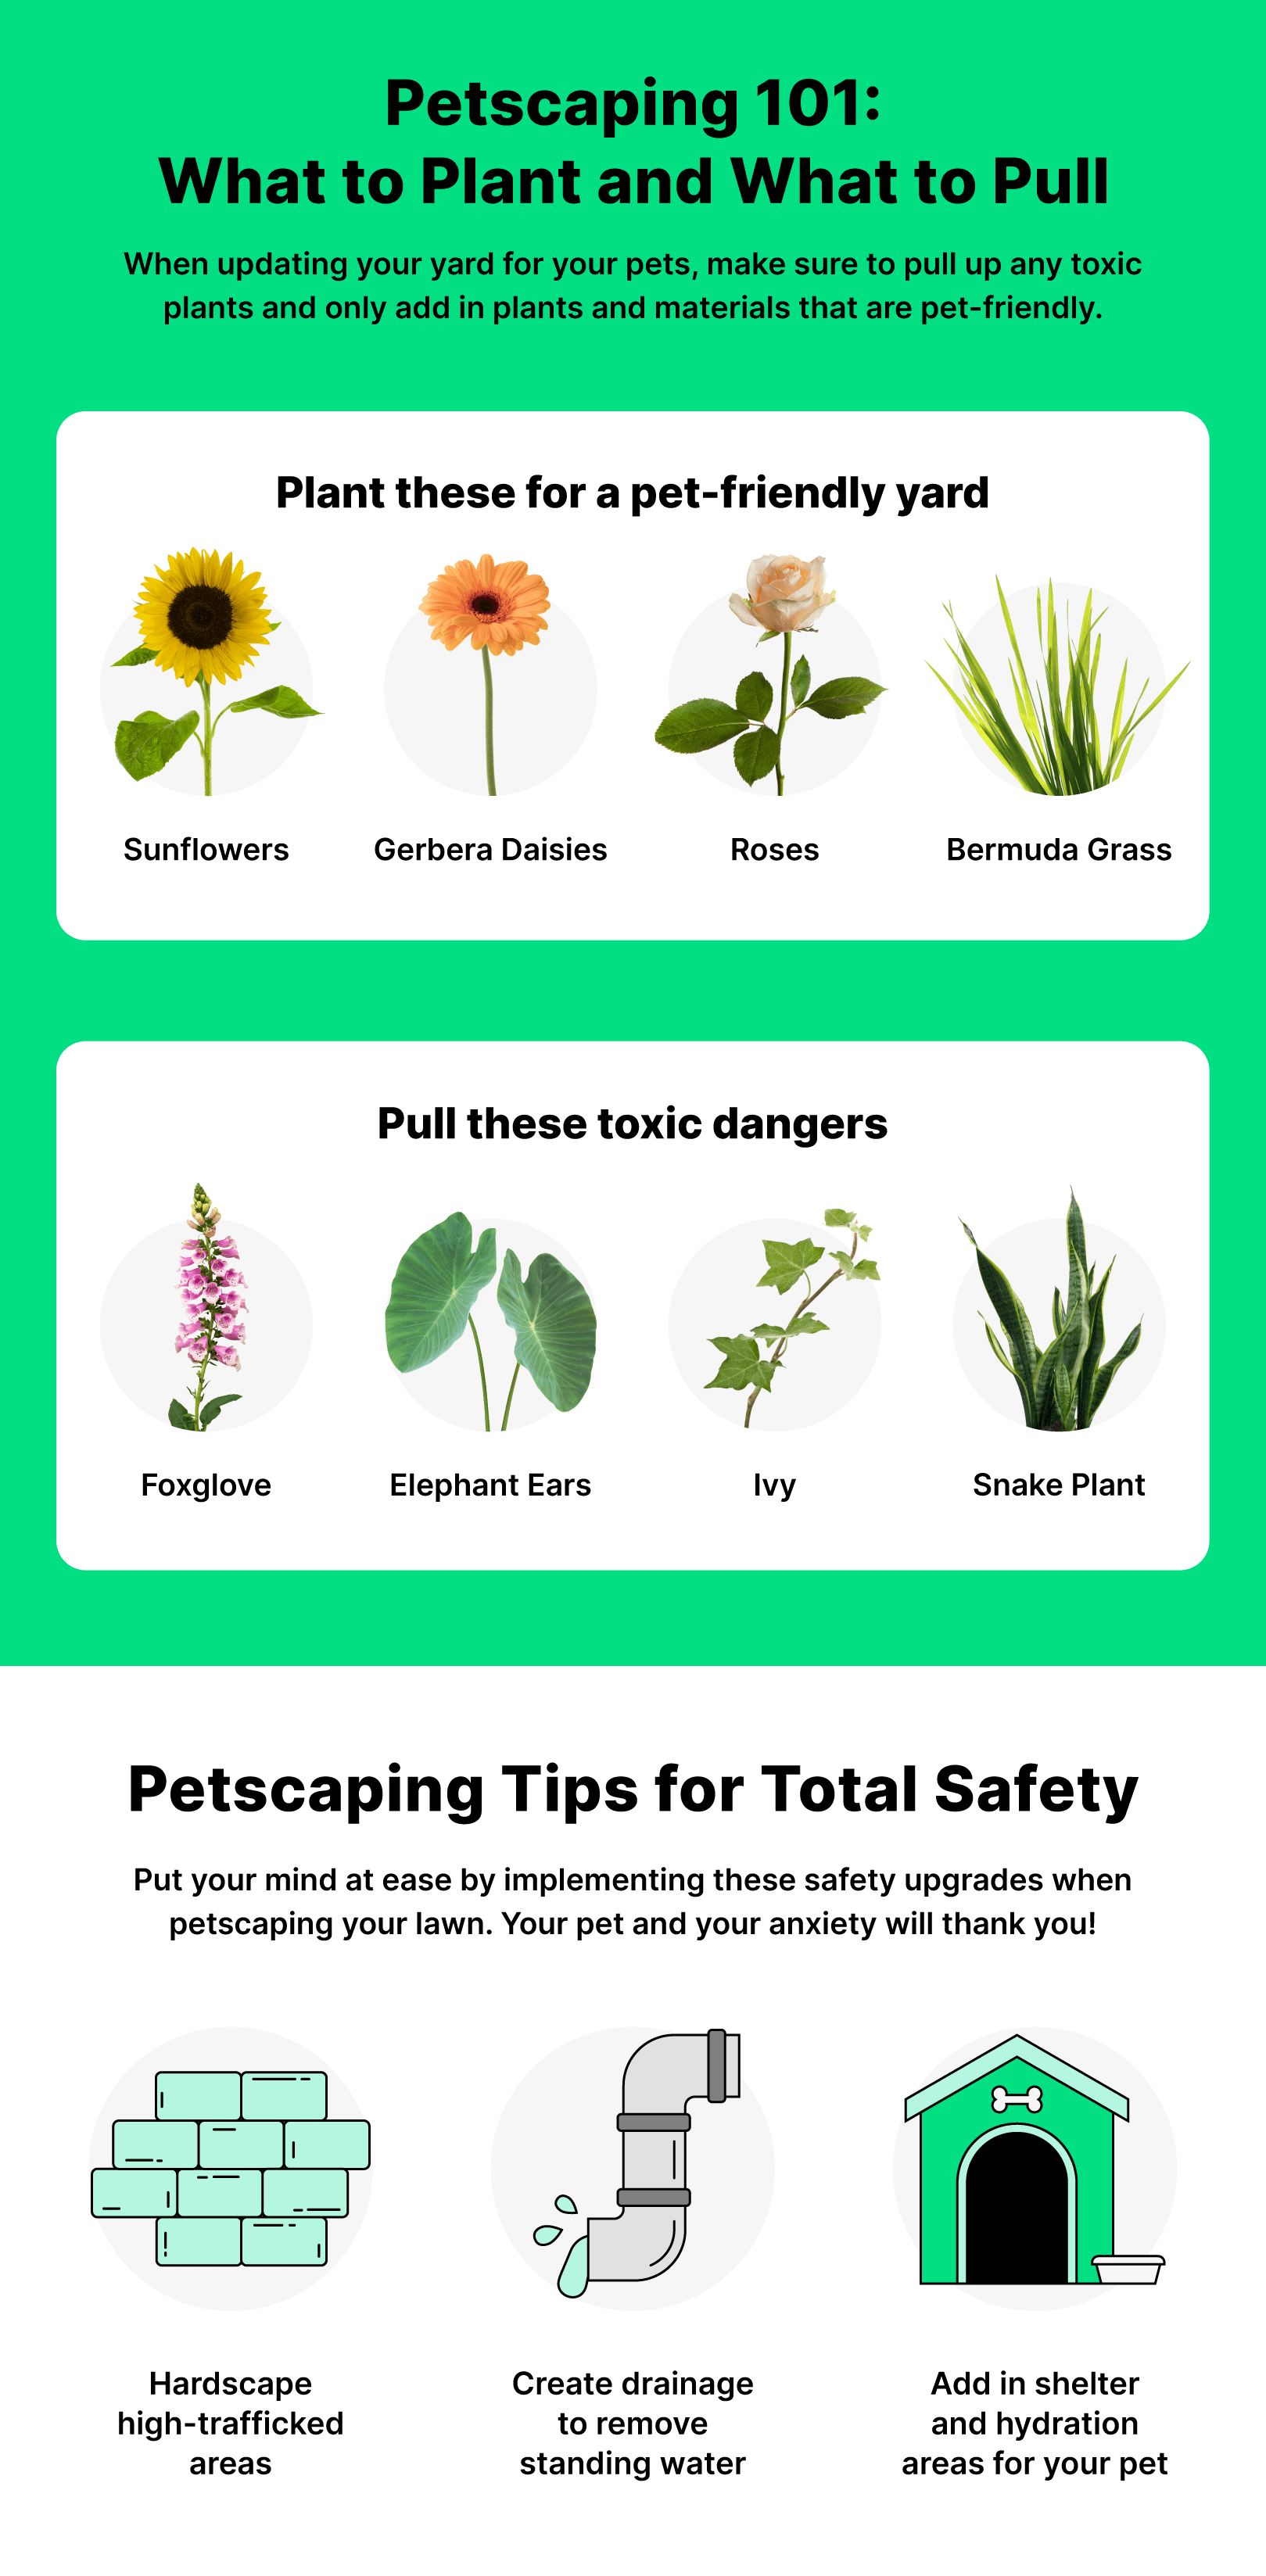 Images of different plants to plant or pull in your yard to keep your pet safe with other tips